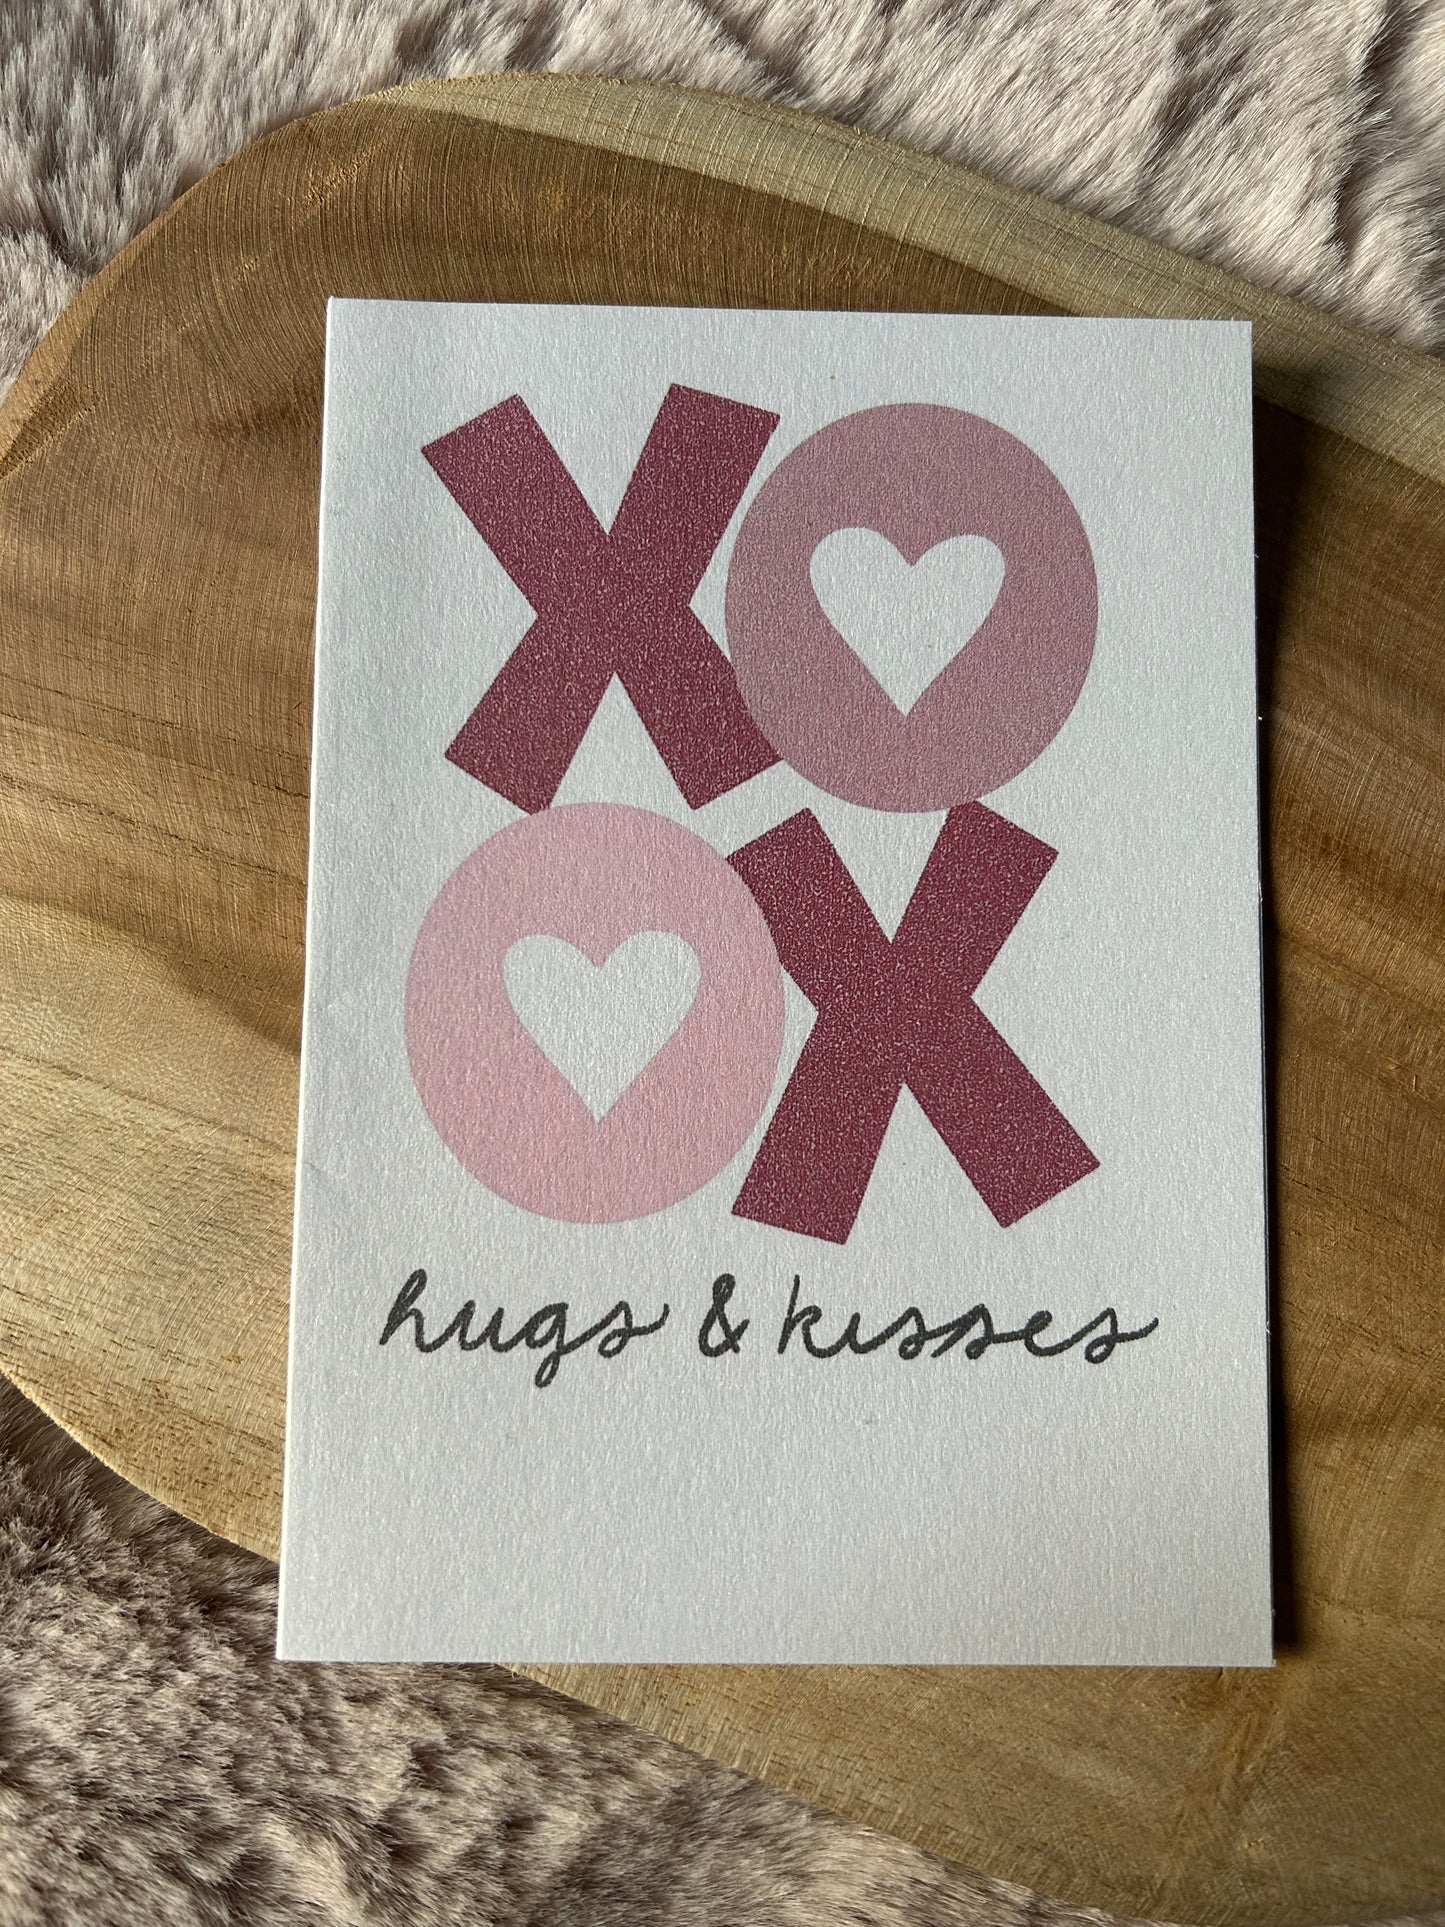 XOXO - Hugs and Kisses Valentine's Card || Quirky Cards